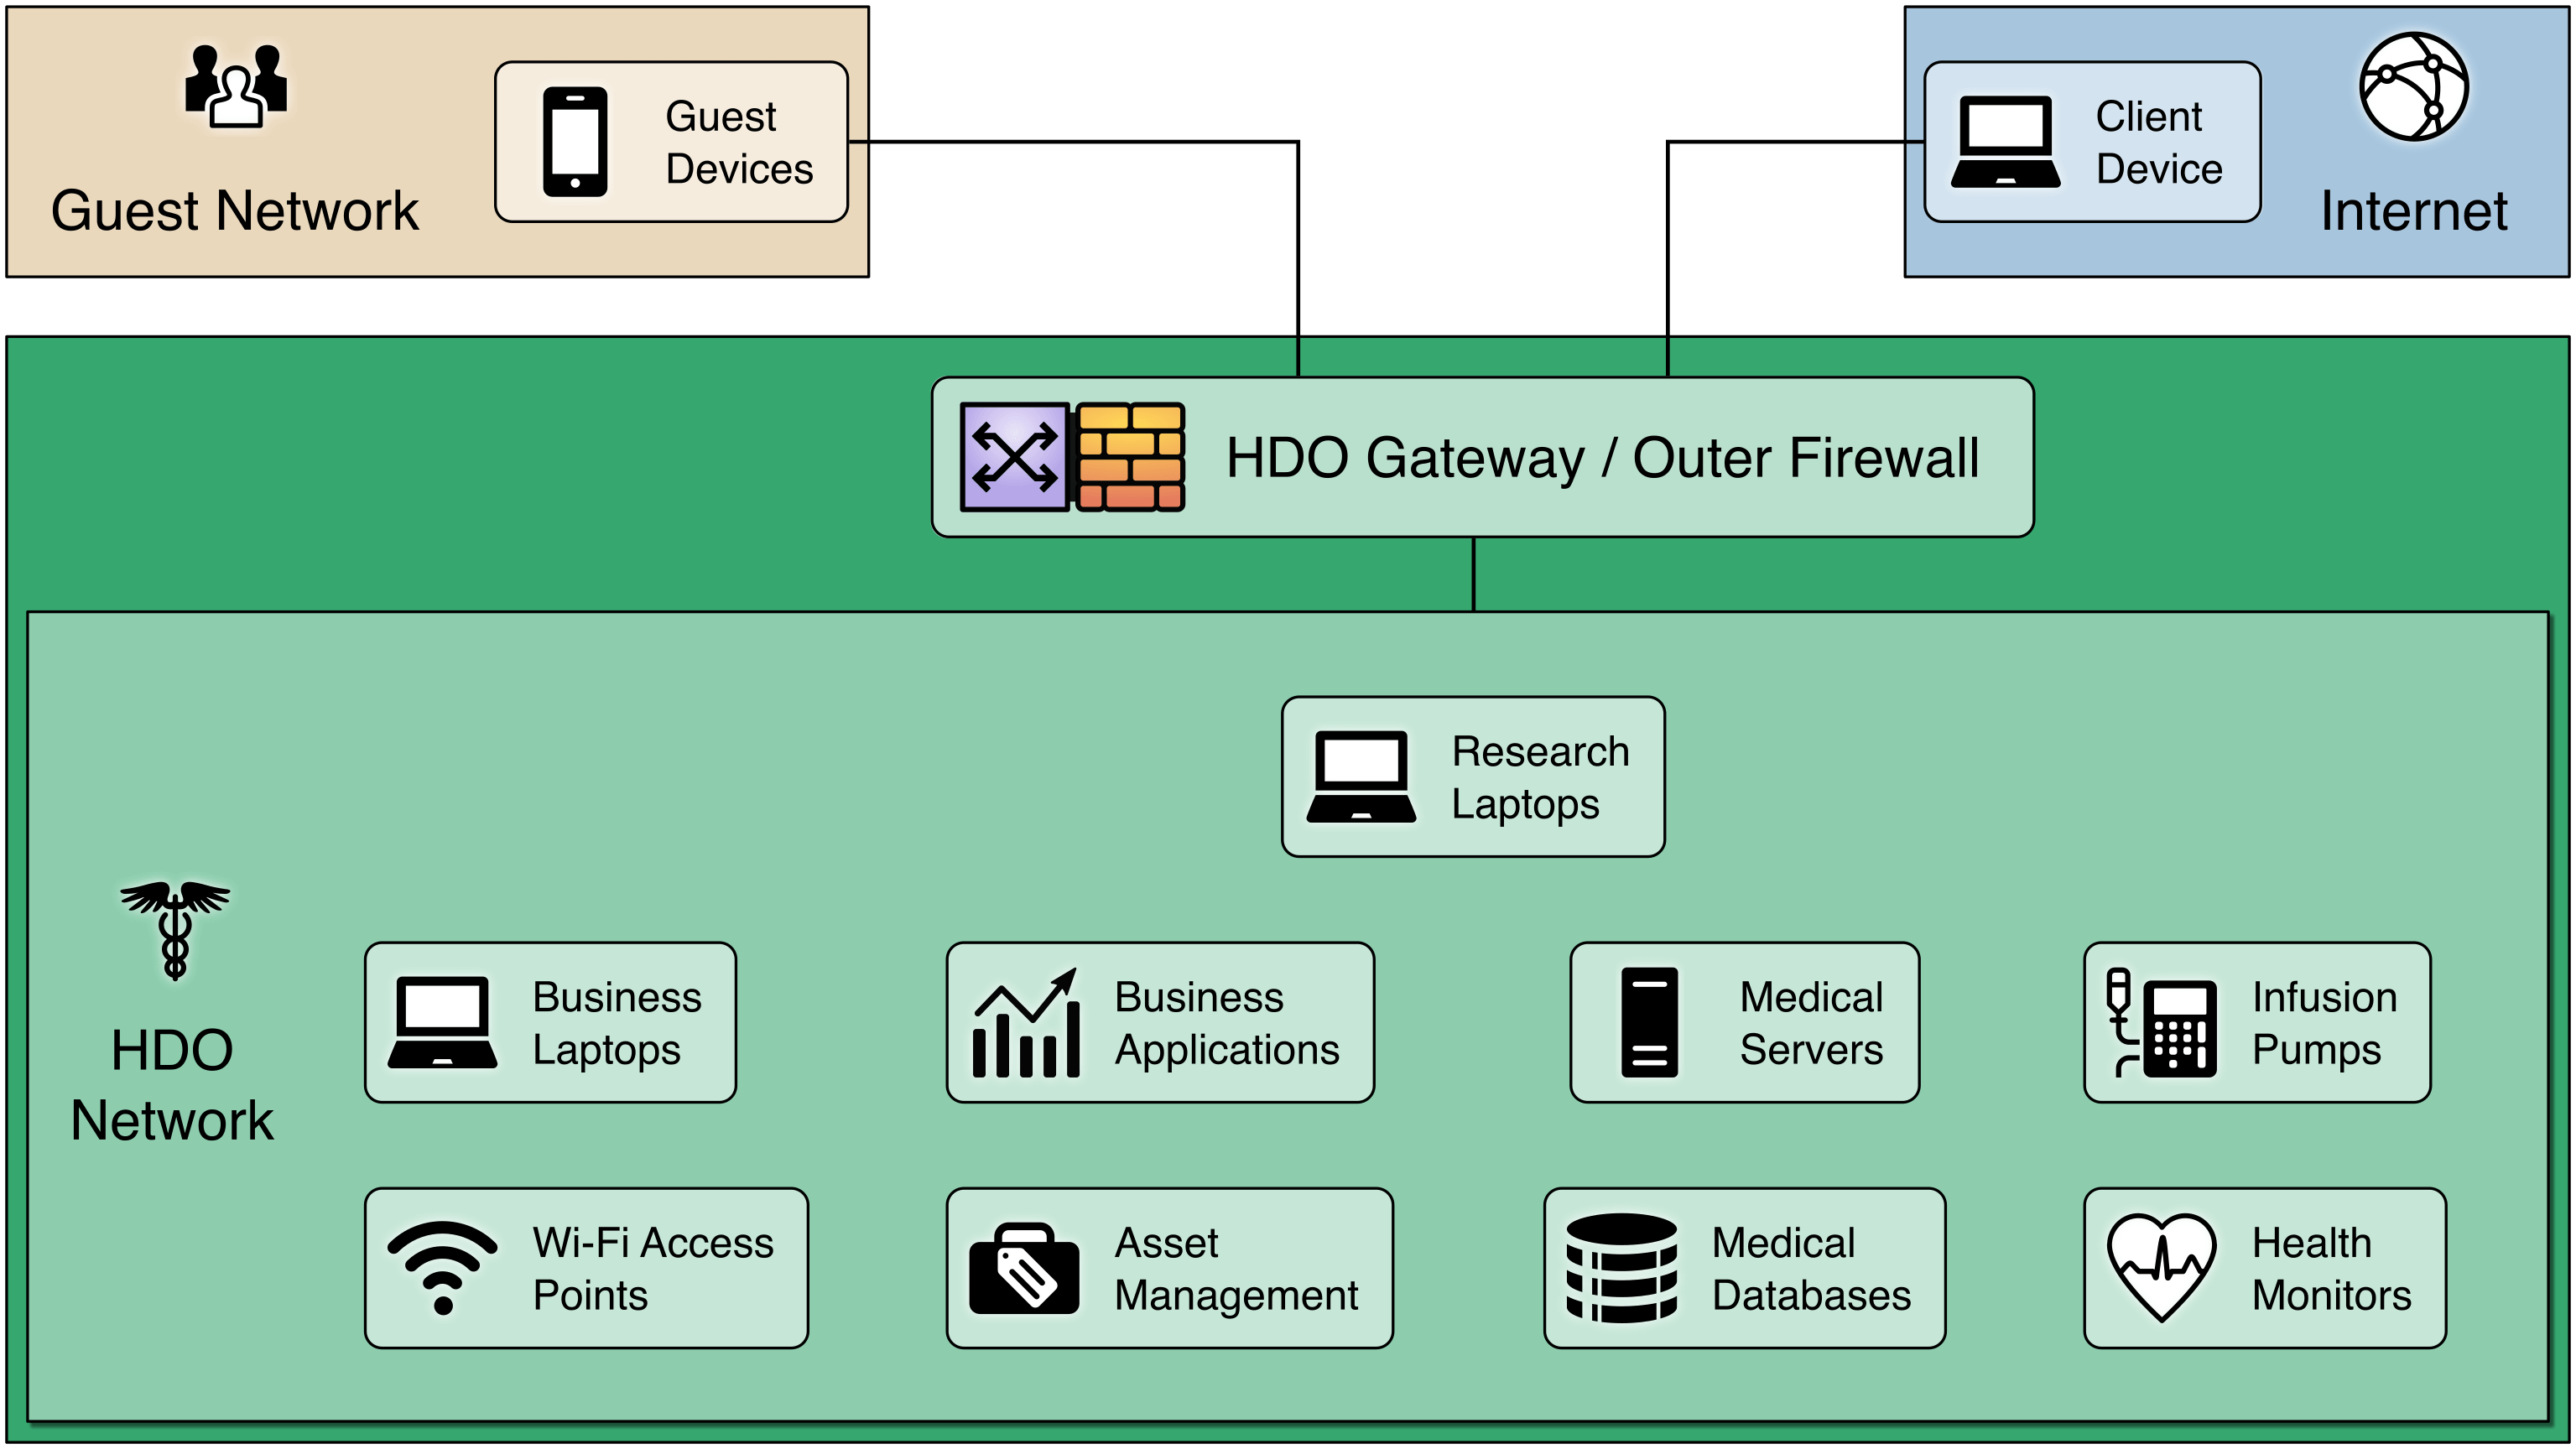 Image depicts a representative healthcare network architecture that does not utilize network segmentation. HDO enterprise devices are all located behind a single firewall on a single, flat network